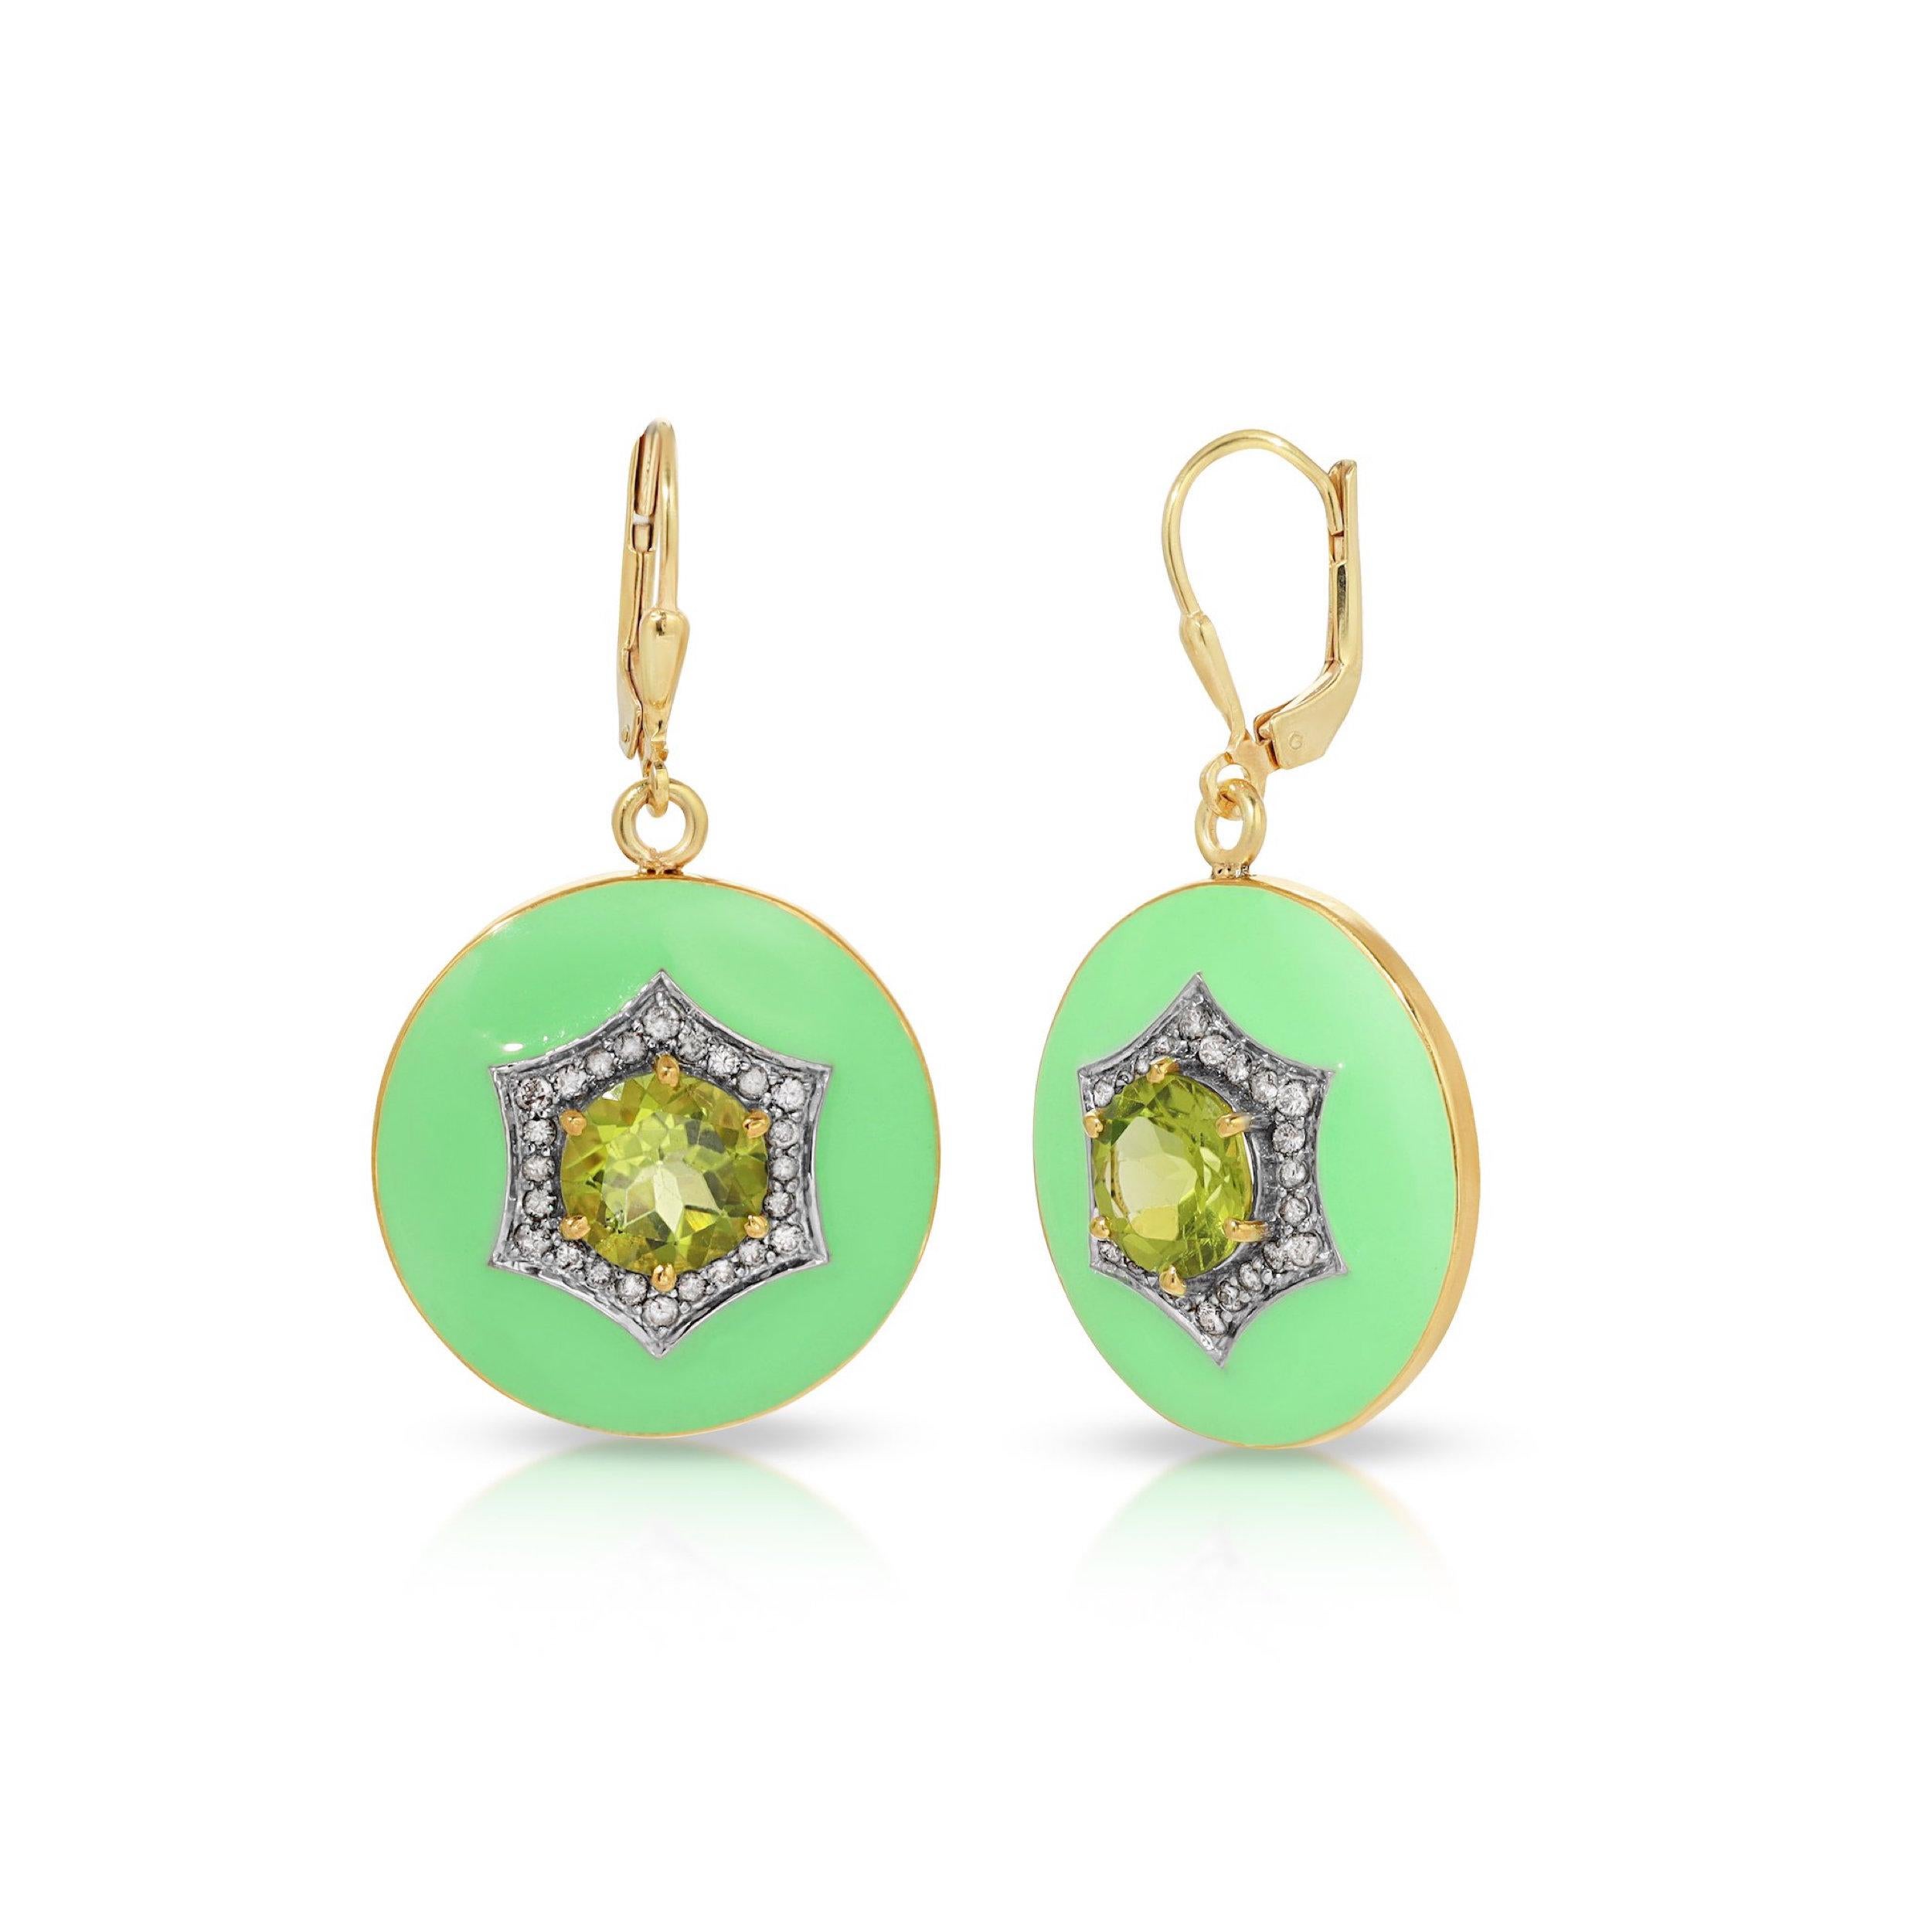 Gorgeous drop earrings of modern design with a mix of gemstones and enamel. These earrings feature round cut, vibrant Green Peridot encased in a hexagonal design of sparkling White Diamonds on a cirque design of glossy mint green enamel. These